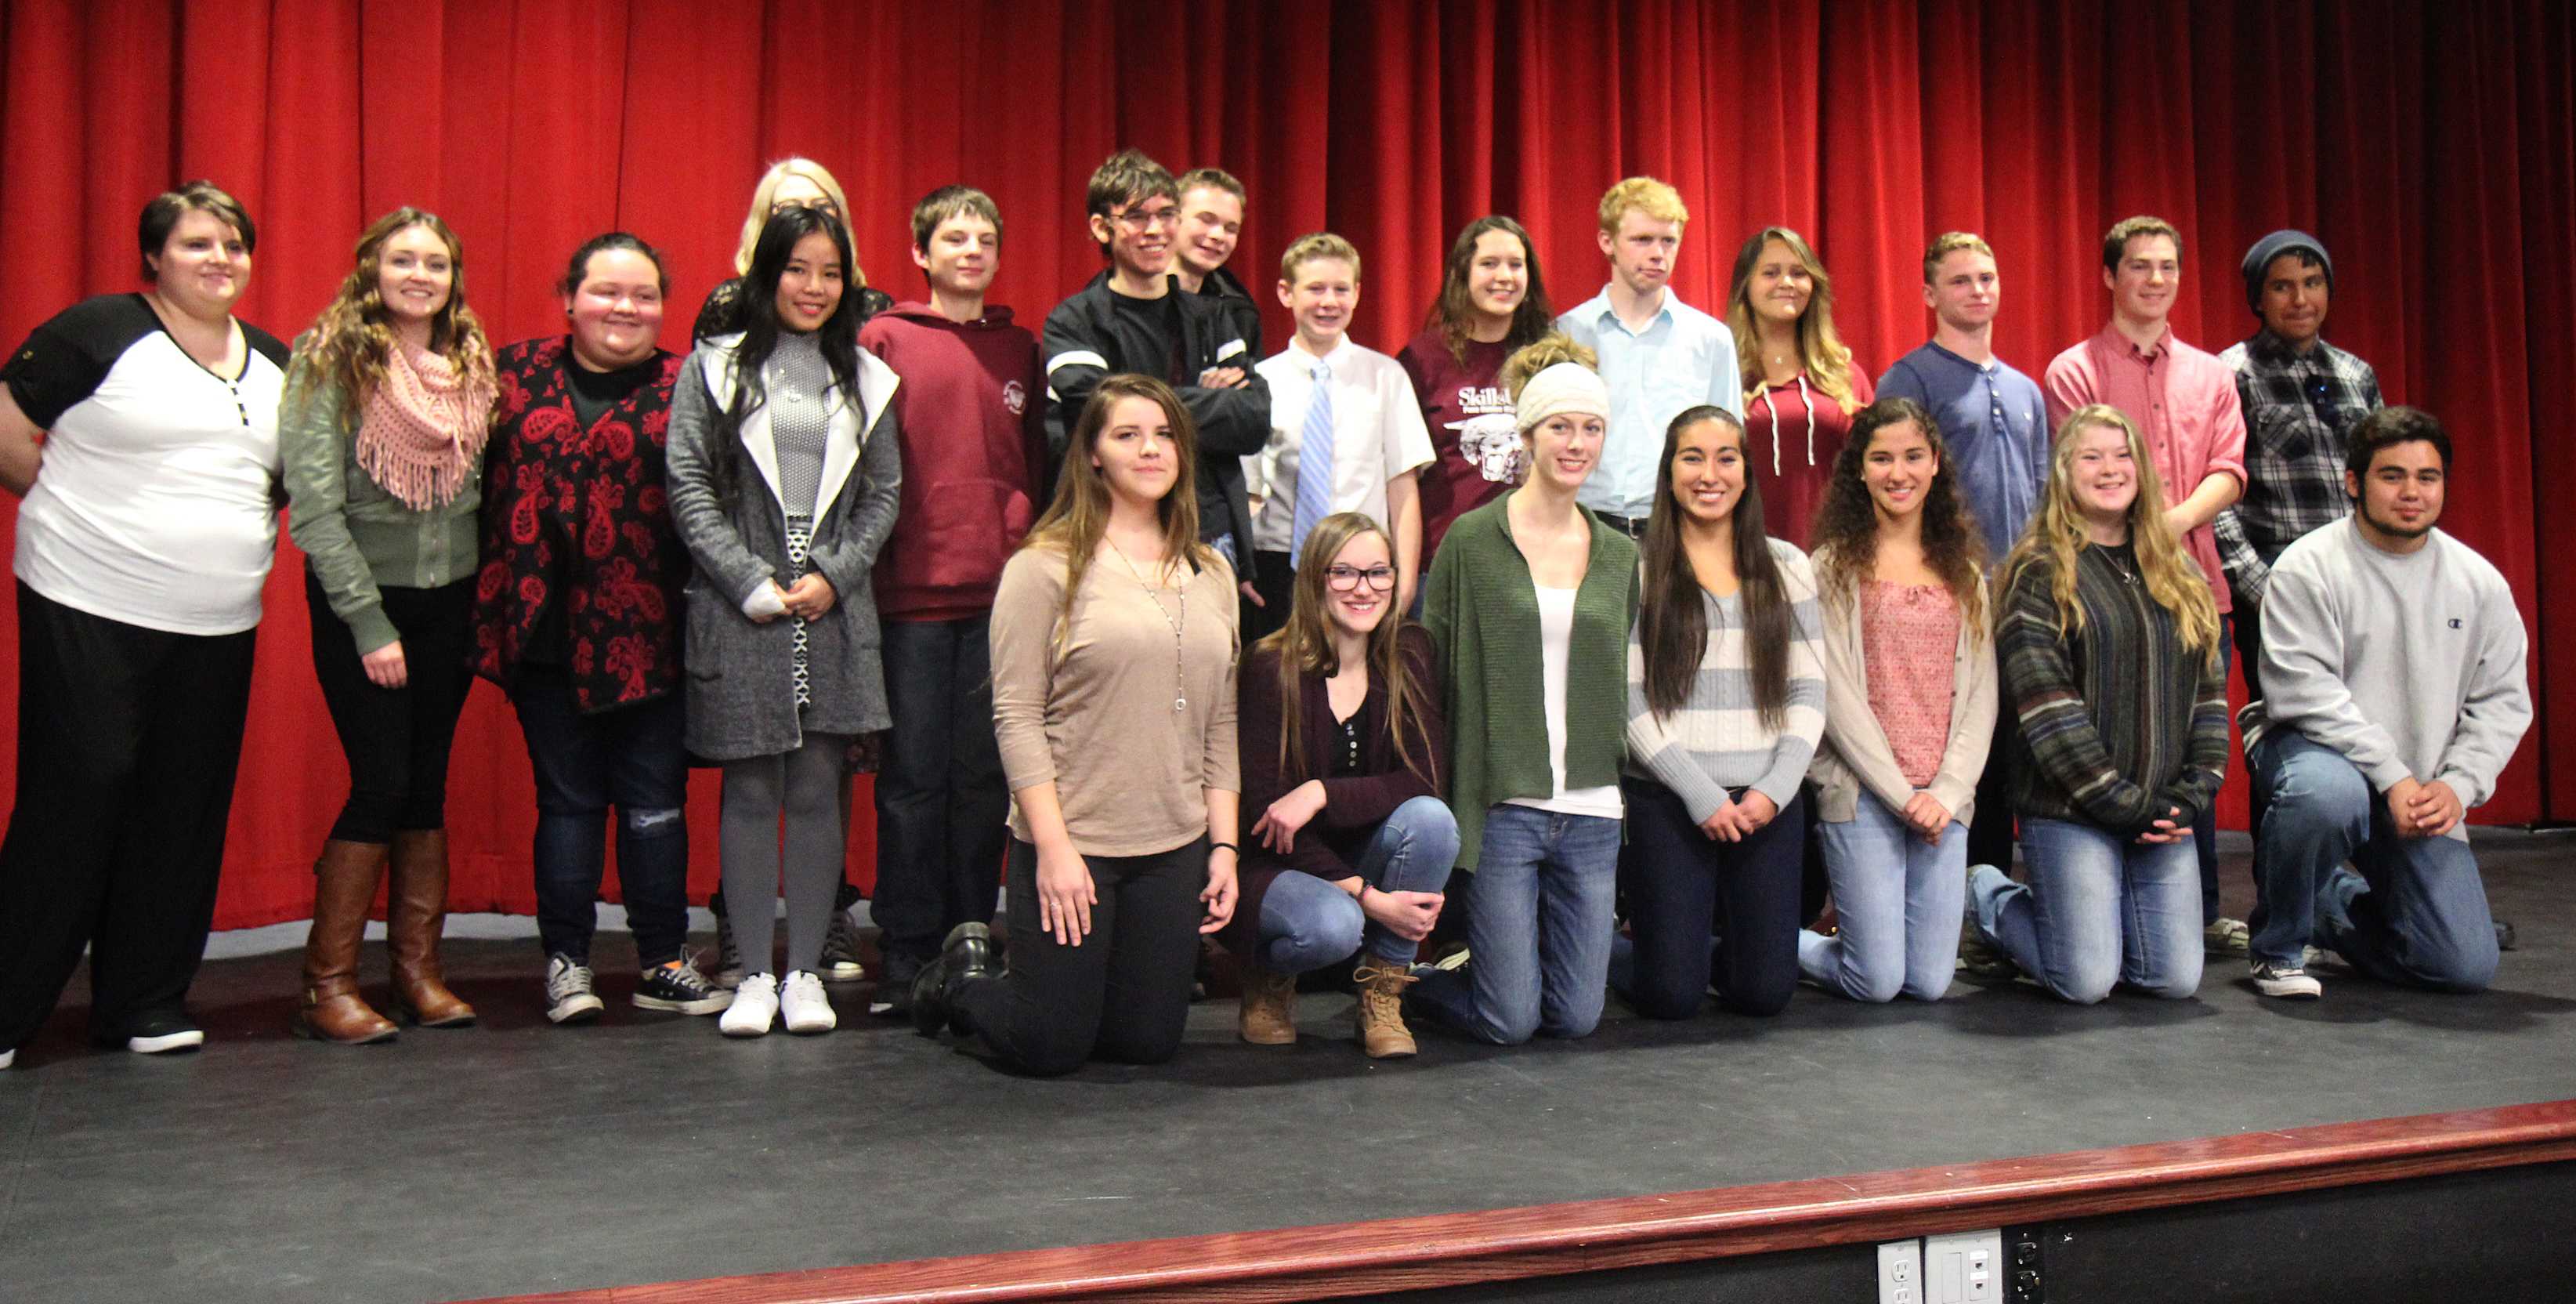 The 28 contestants of the 2016 PRHS Poetry Out Loud competition